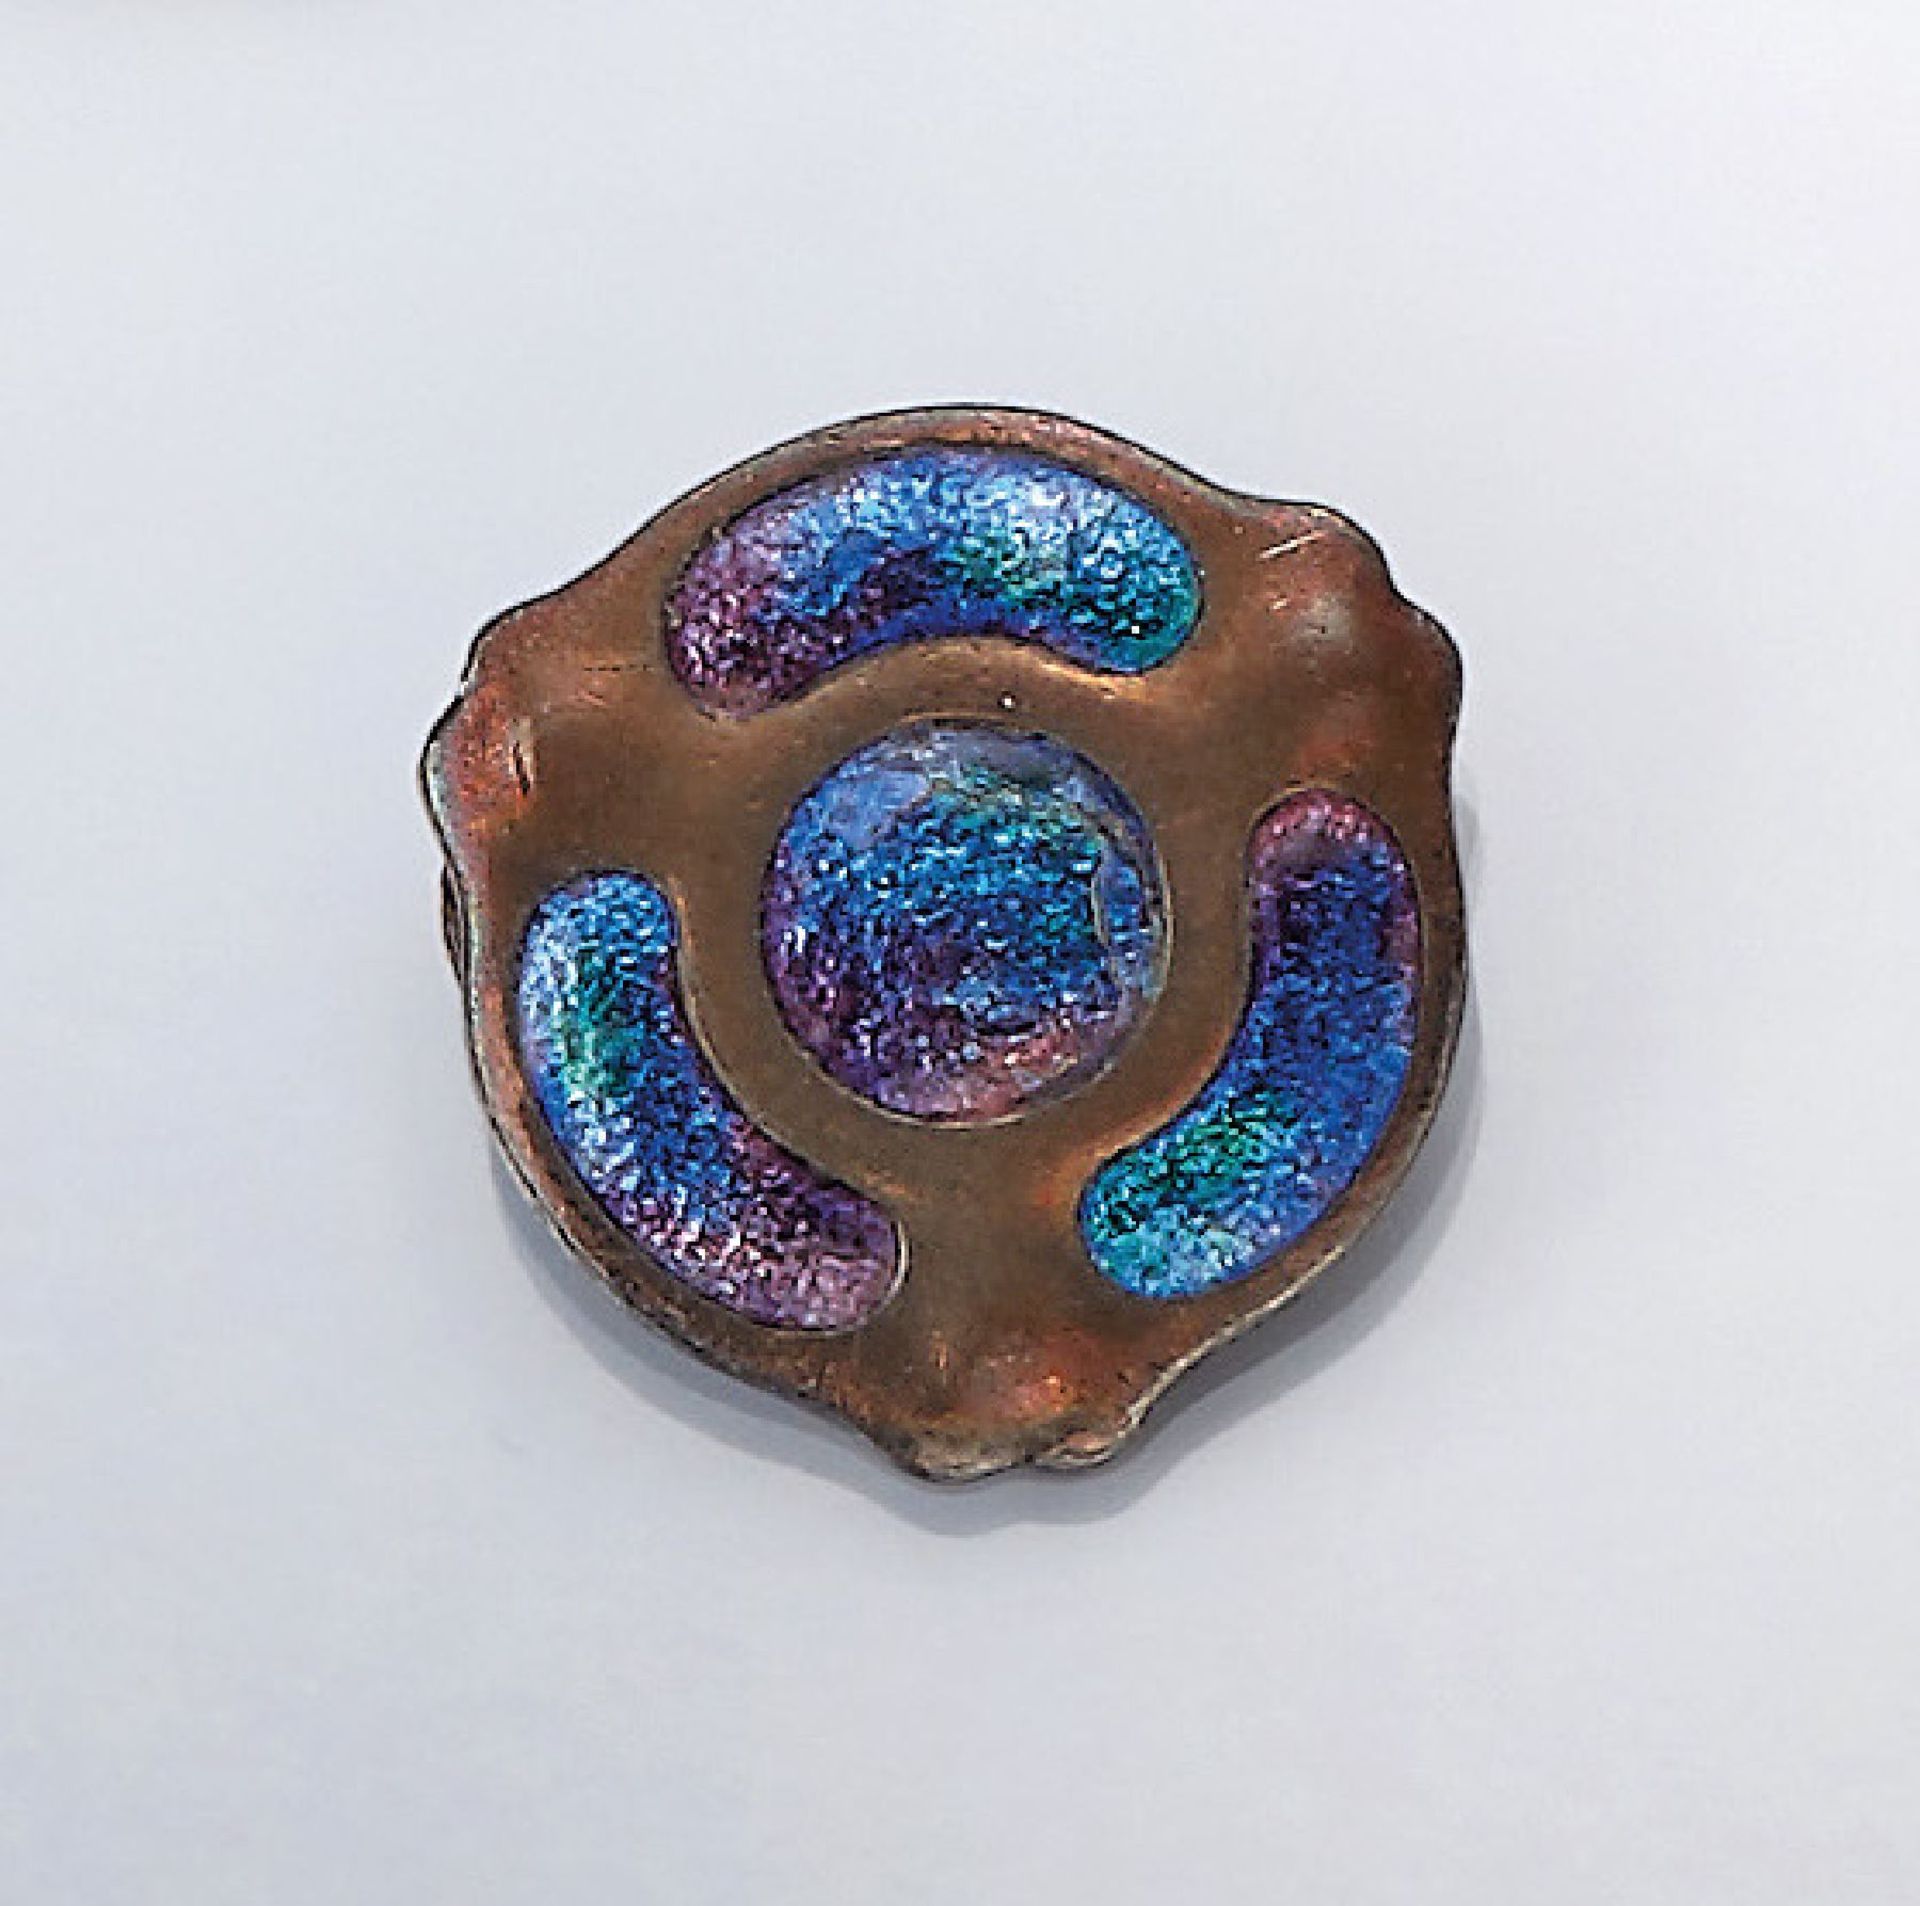 CHARLES HORNER brooch with enamel , Chester,1909-10s, sterling silver, stiltyp., in different shades